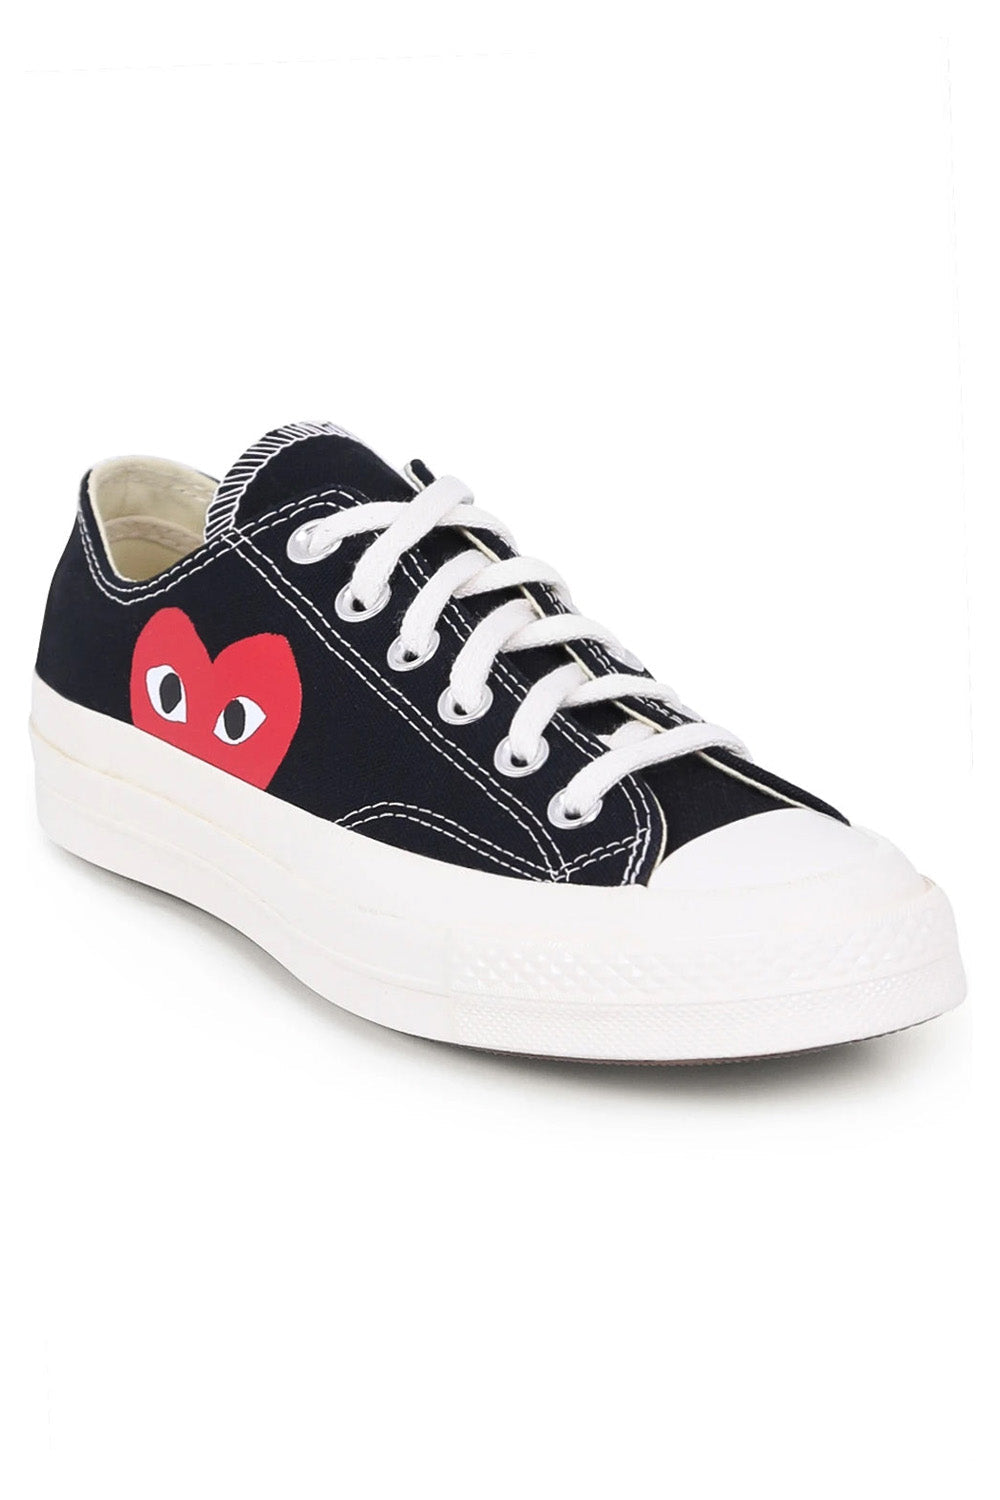 COMME DES GARCONS PLAY SNEAKERS x CONVERSE CHUCK TAYLOR LOW TOP SNEAKER | BLACK